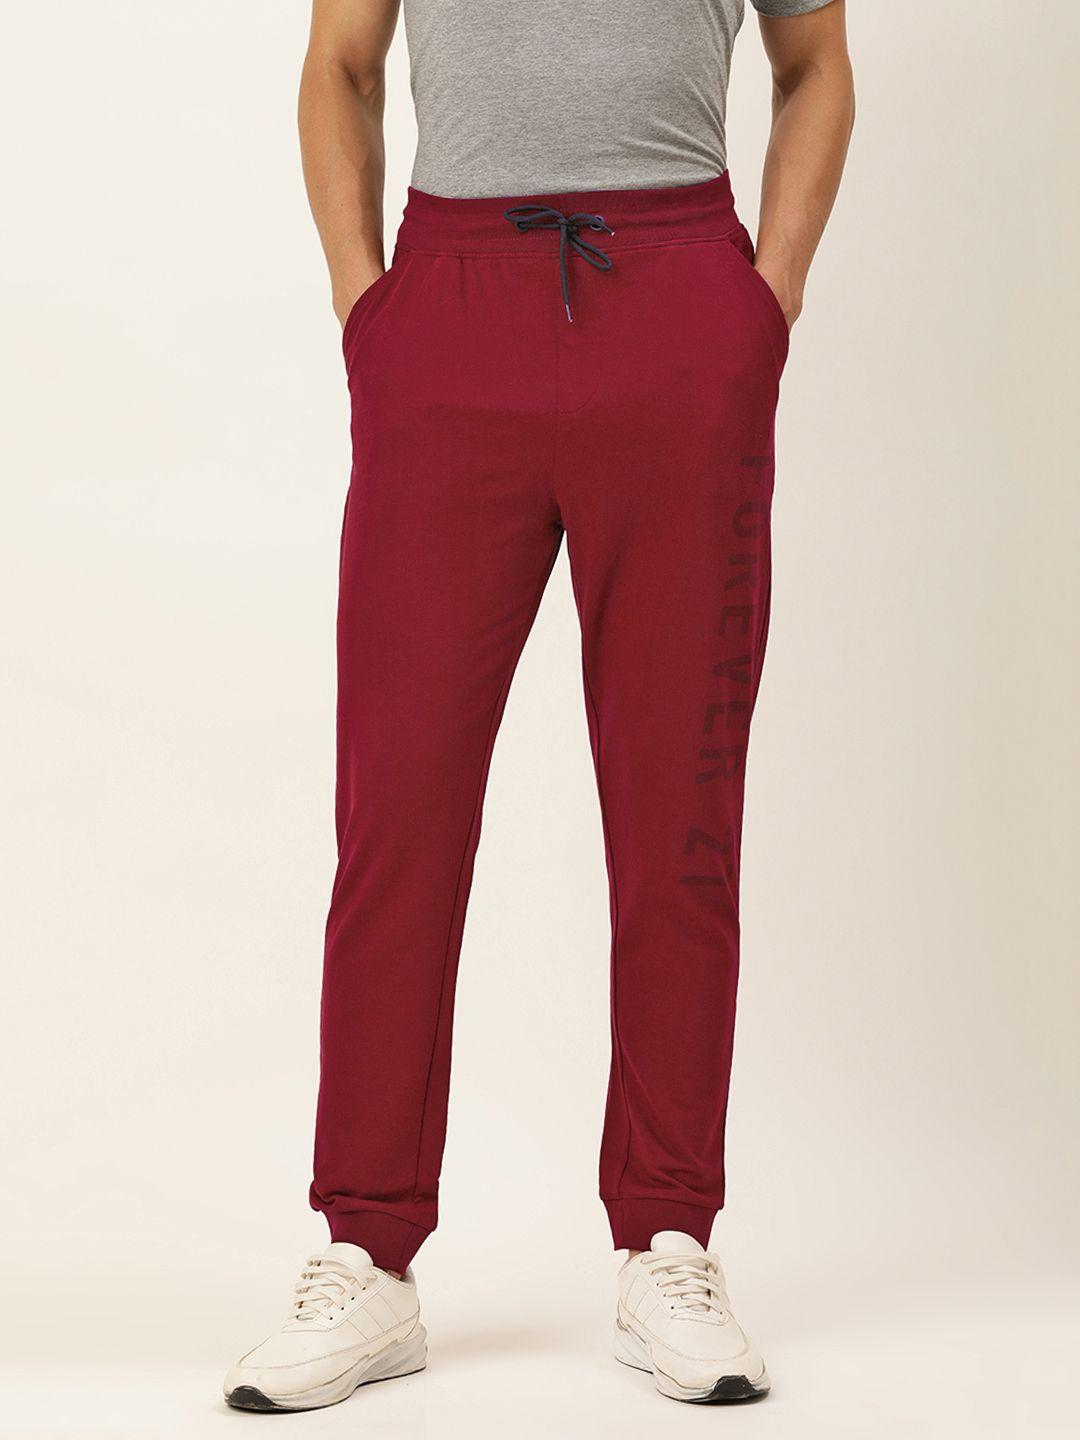 forever 21 maroon brand logo printed active sport joggers track pant